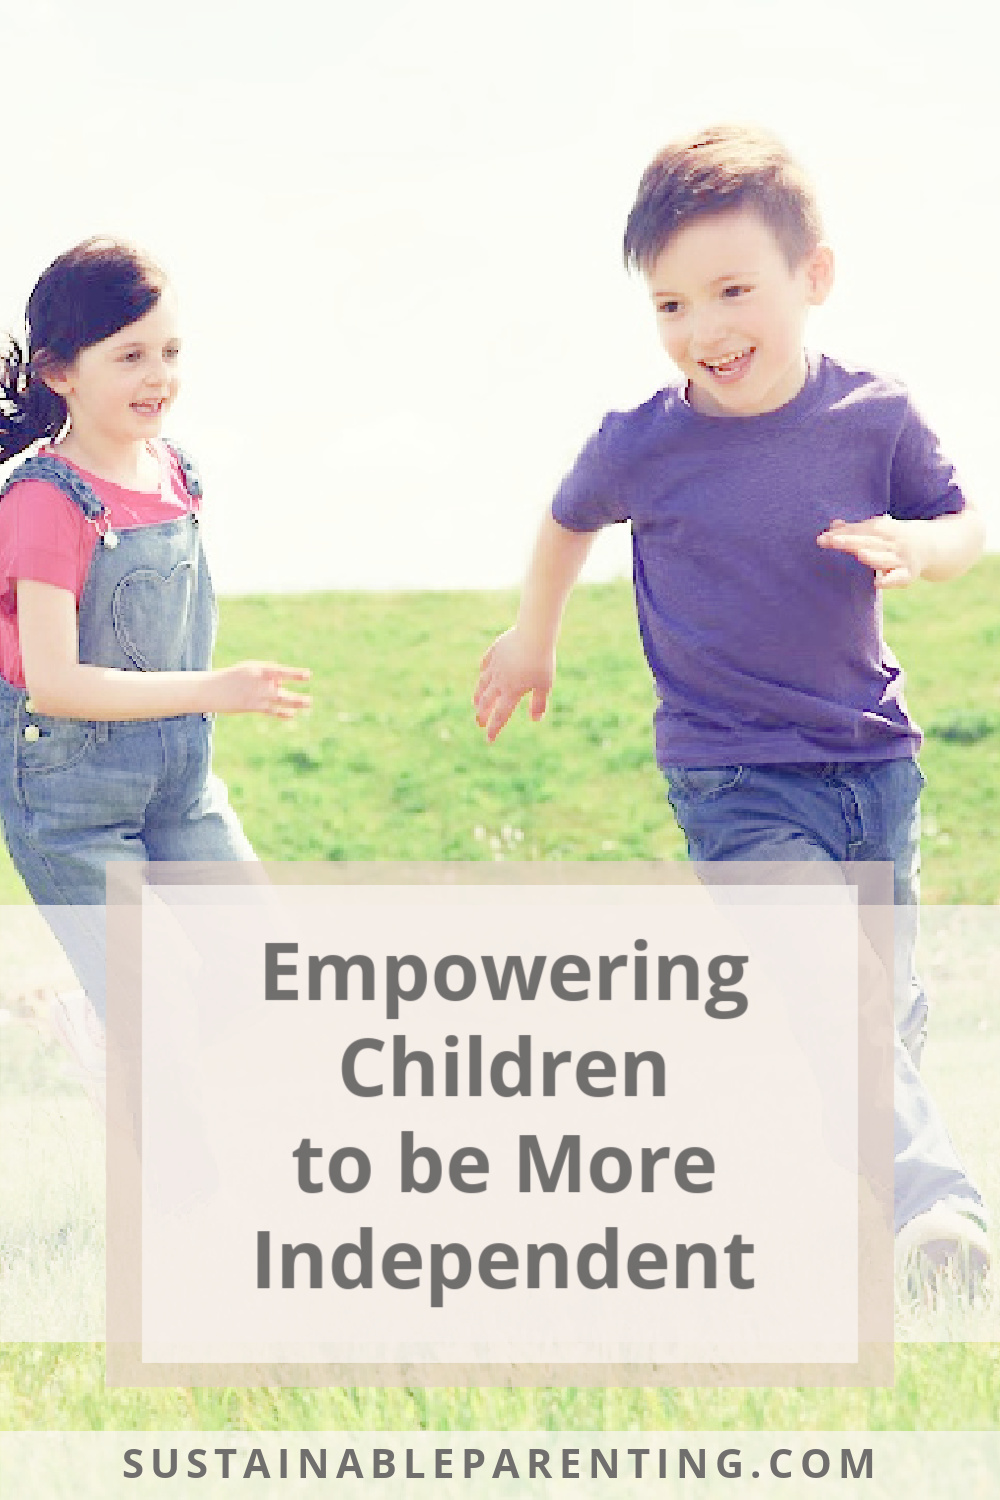 Empowering Children to be More Independent